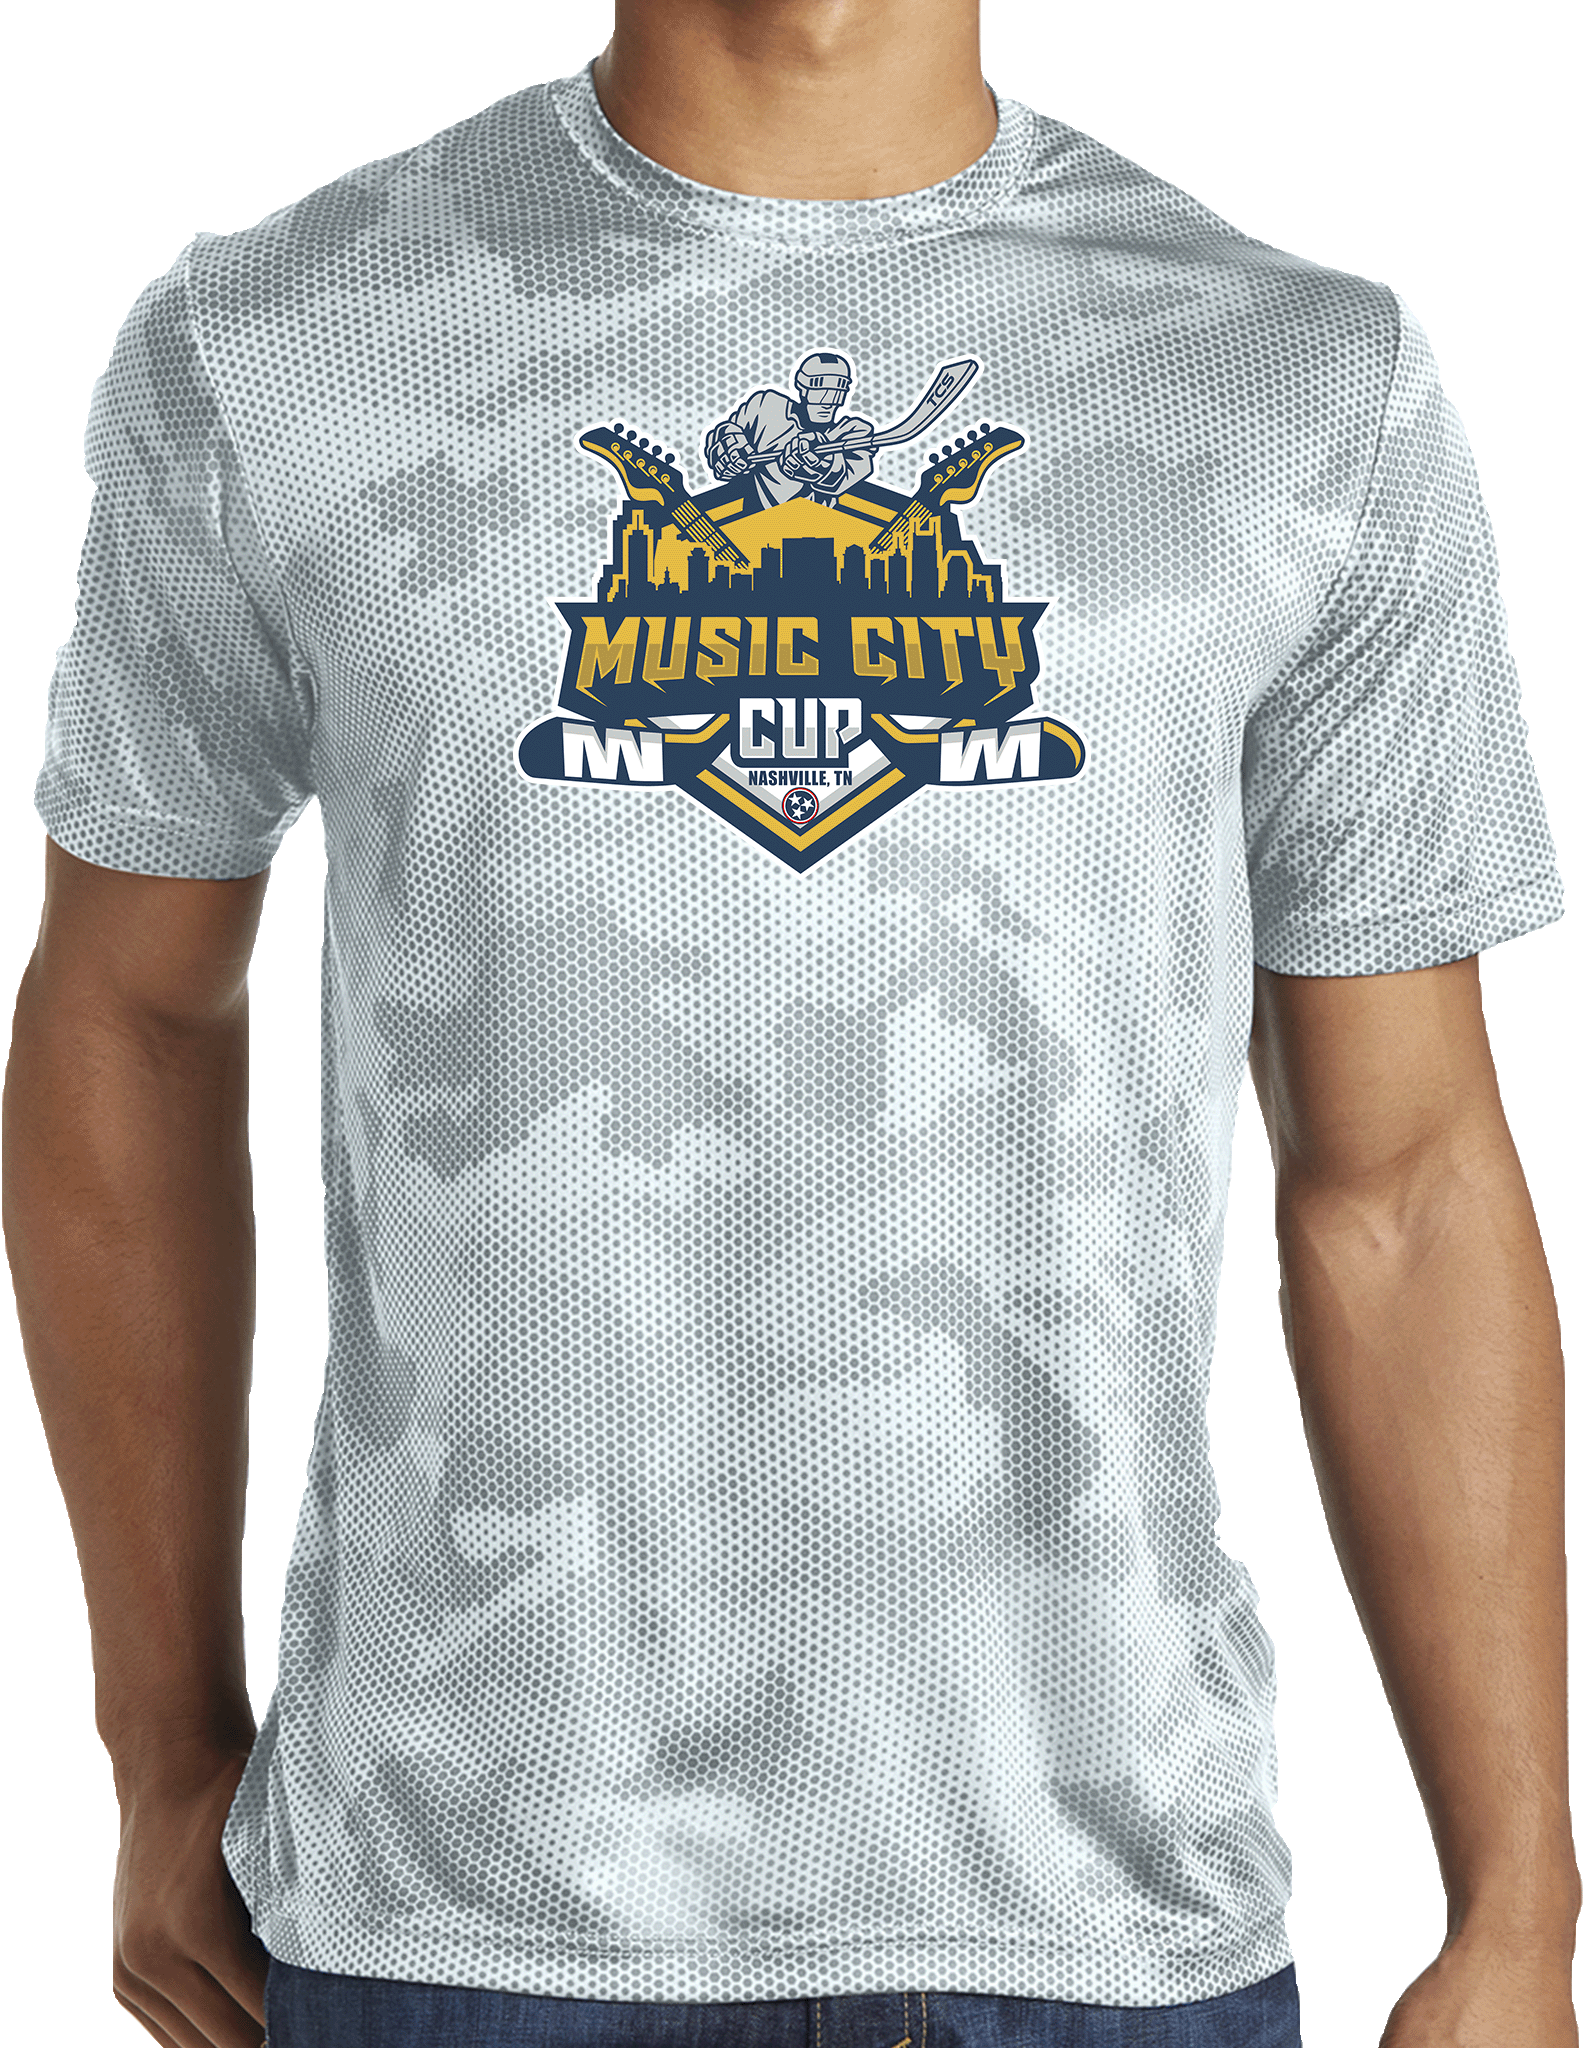 PERFORMANCE SHIRTS - 2023 Music City Cup